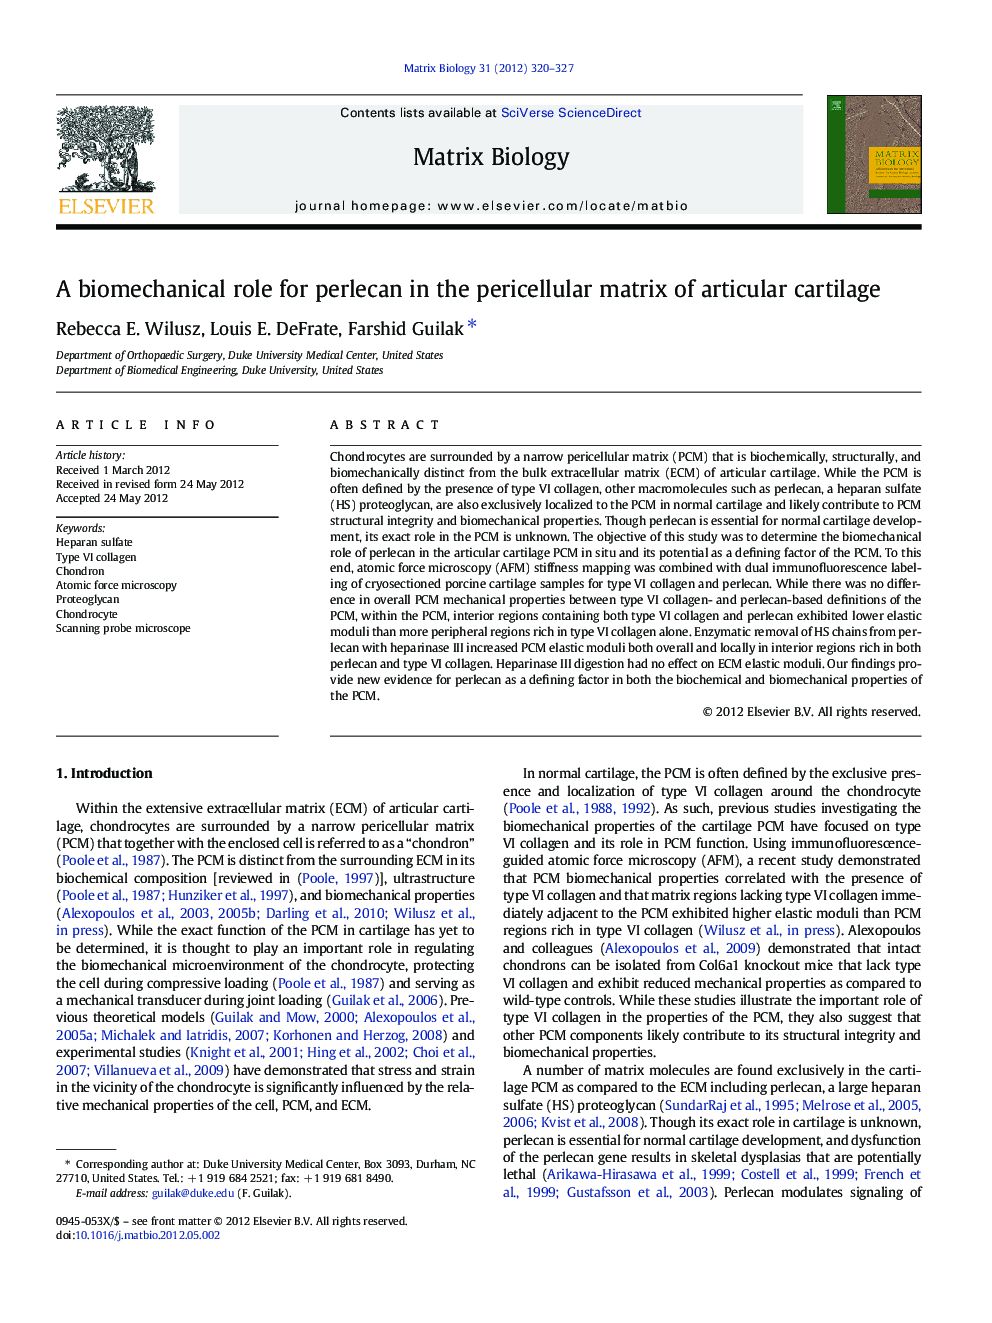 A biomechanical role for perlecan in the pericellular matrix of articular cartilage